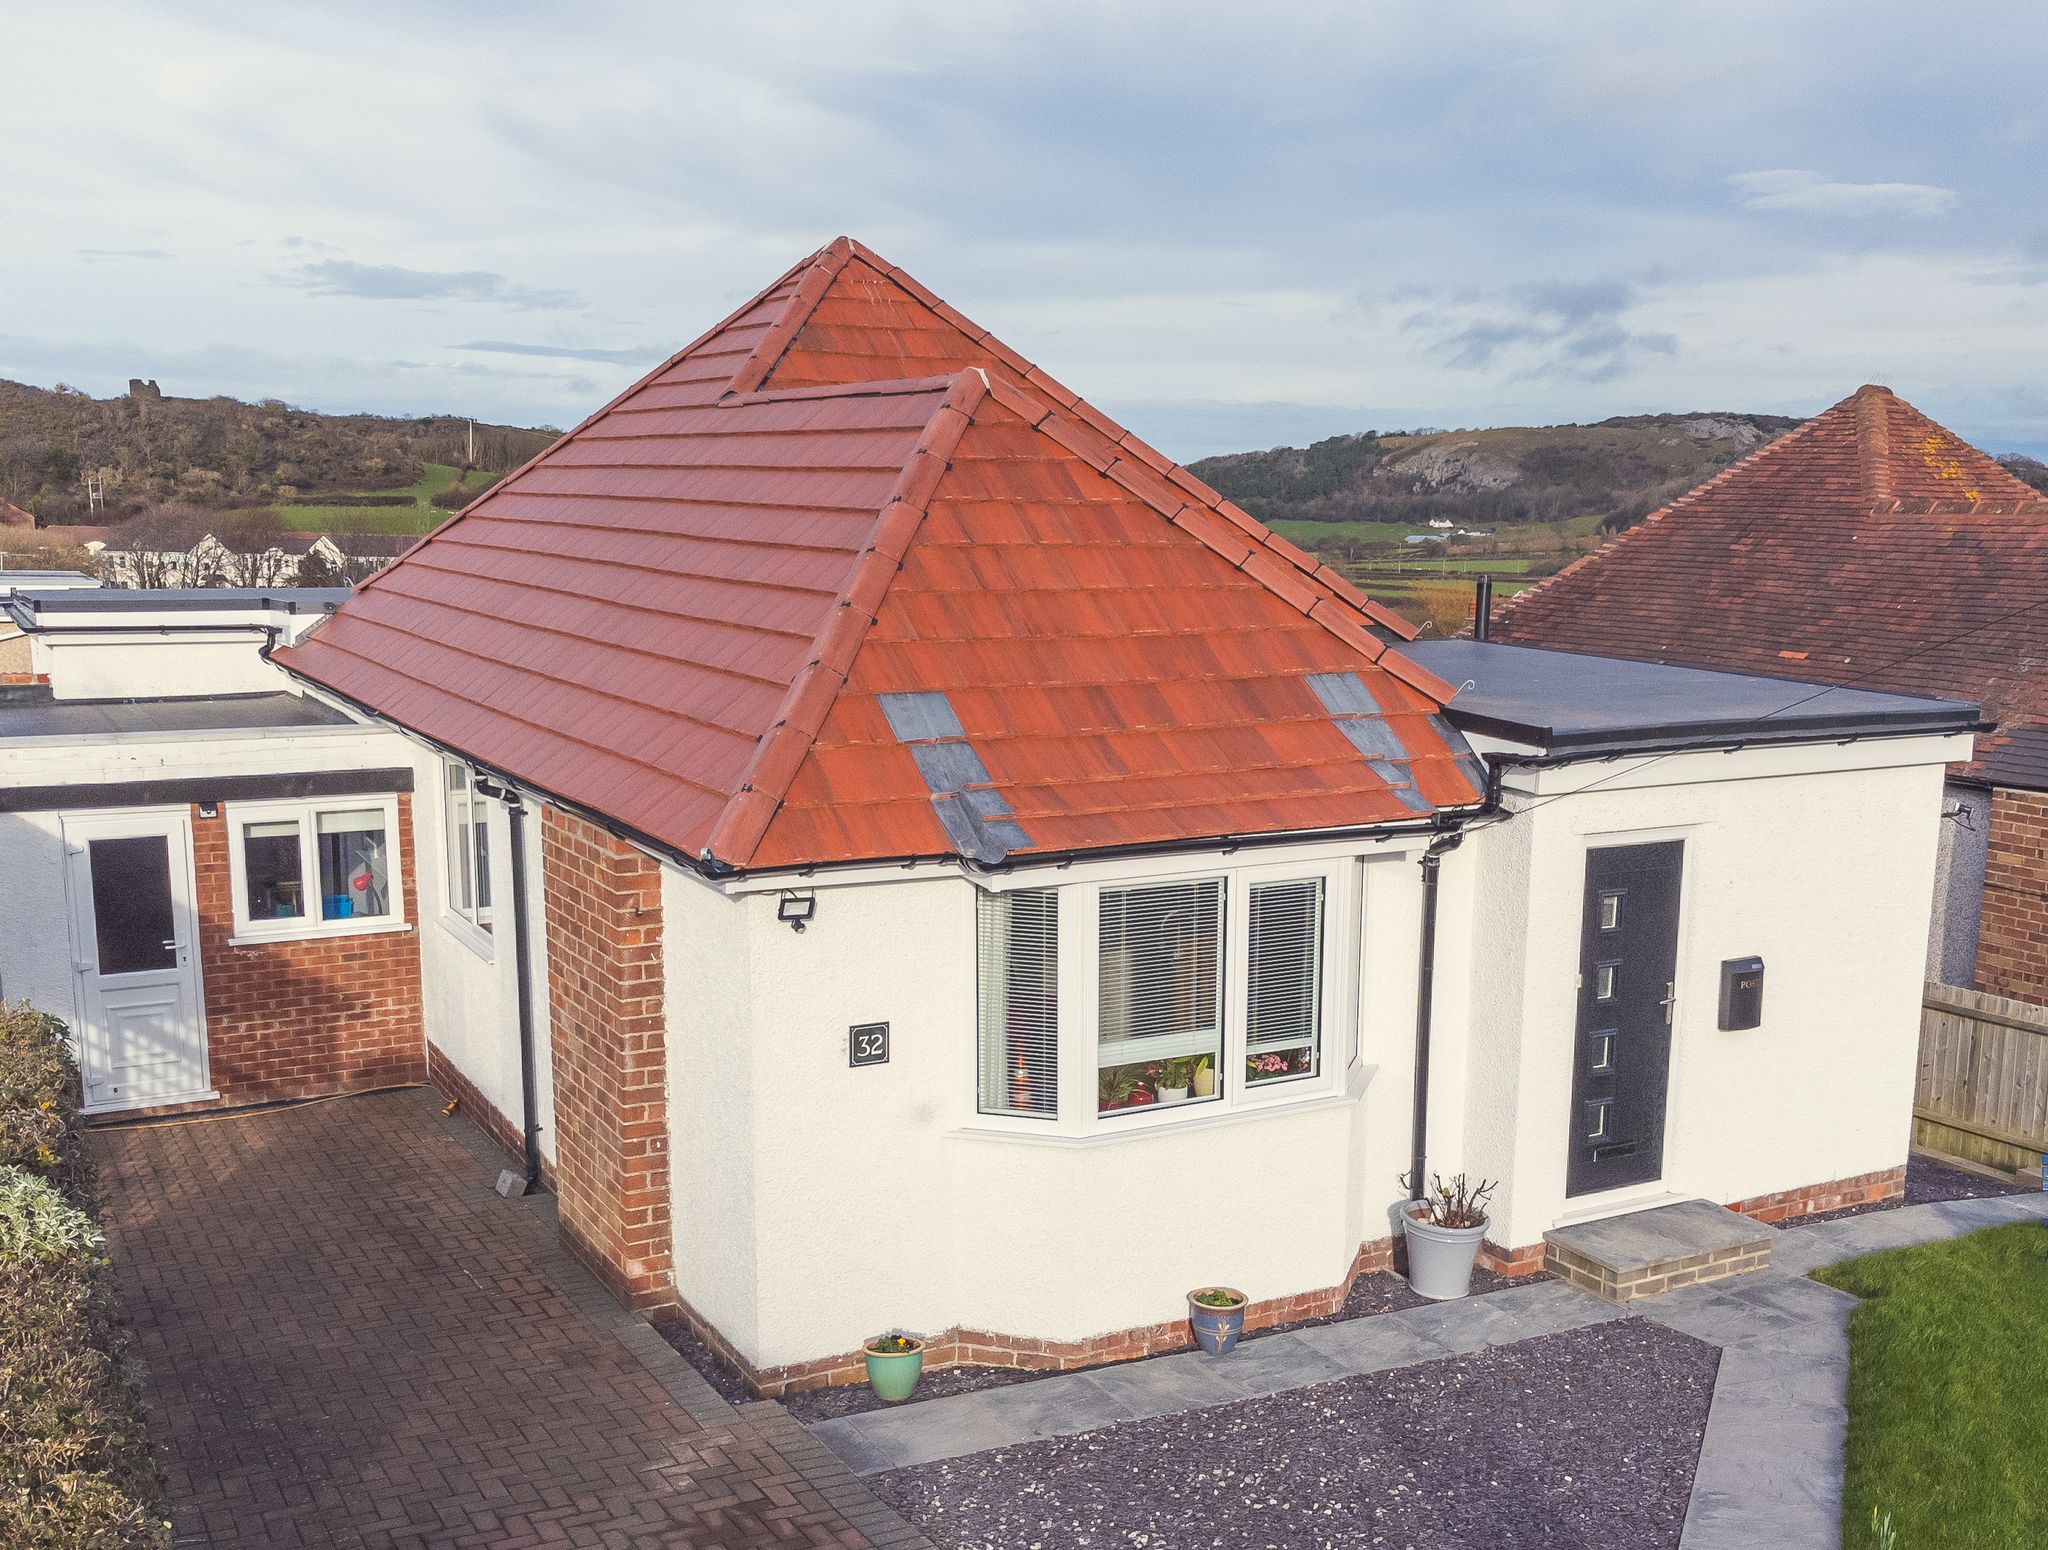 Tile Roof Contractors Trawsfynydd, LL41 - DD Roofing